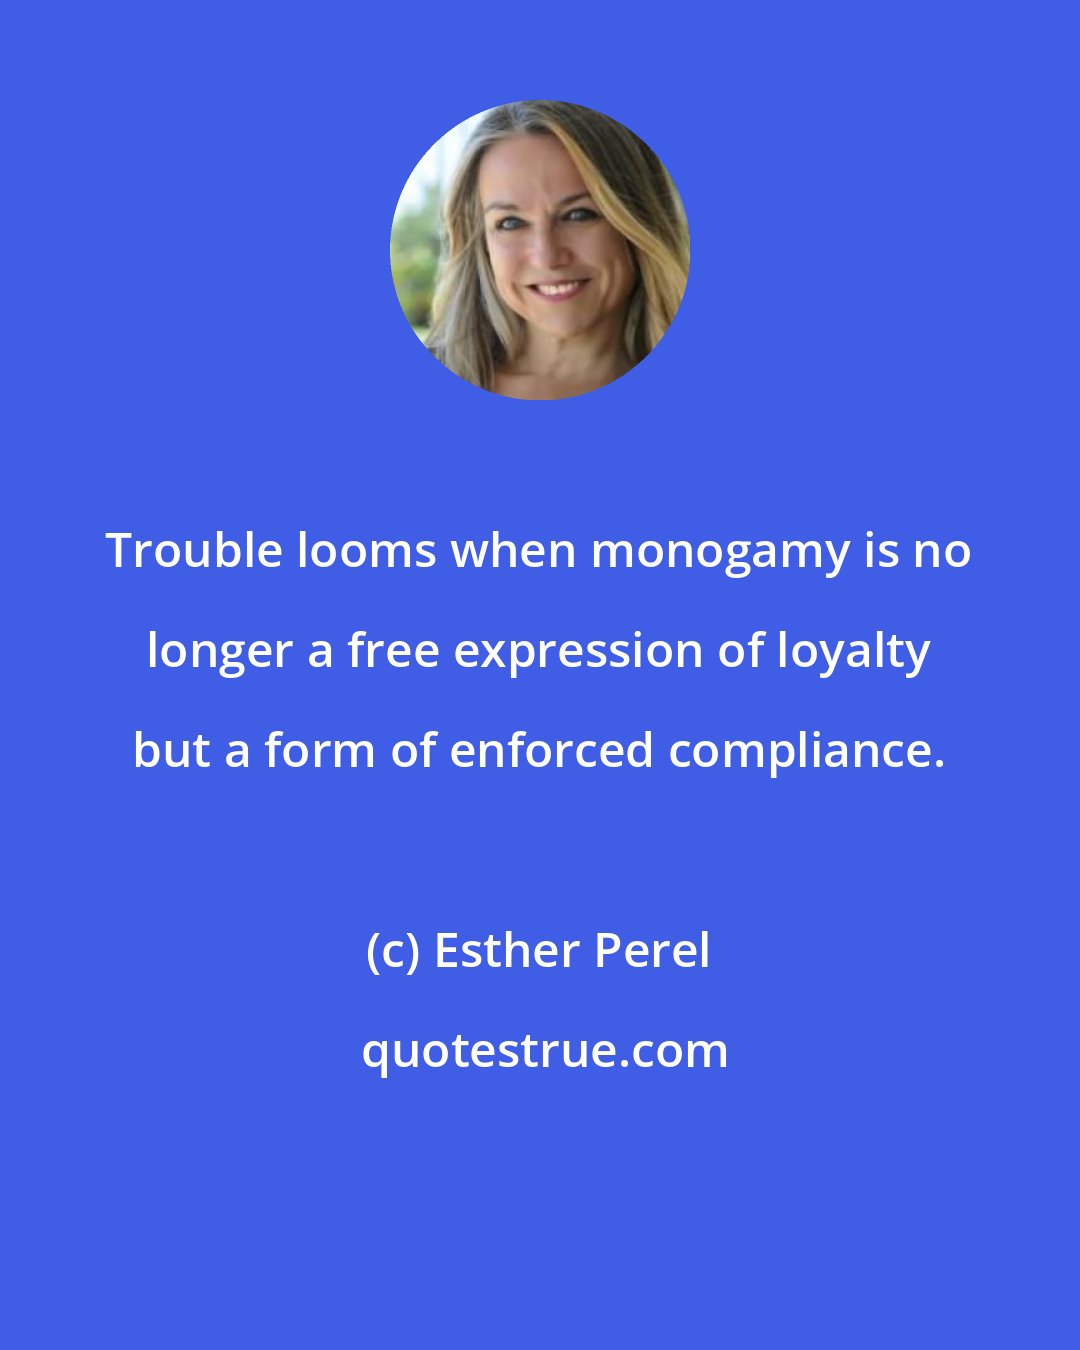 Esther Perel: Trouble looms when monogamy is no longer a free expression of loyalty but a form of enforced compliance.